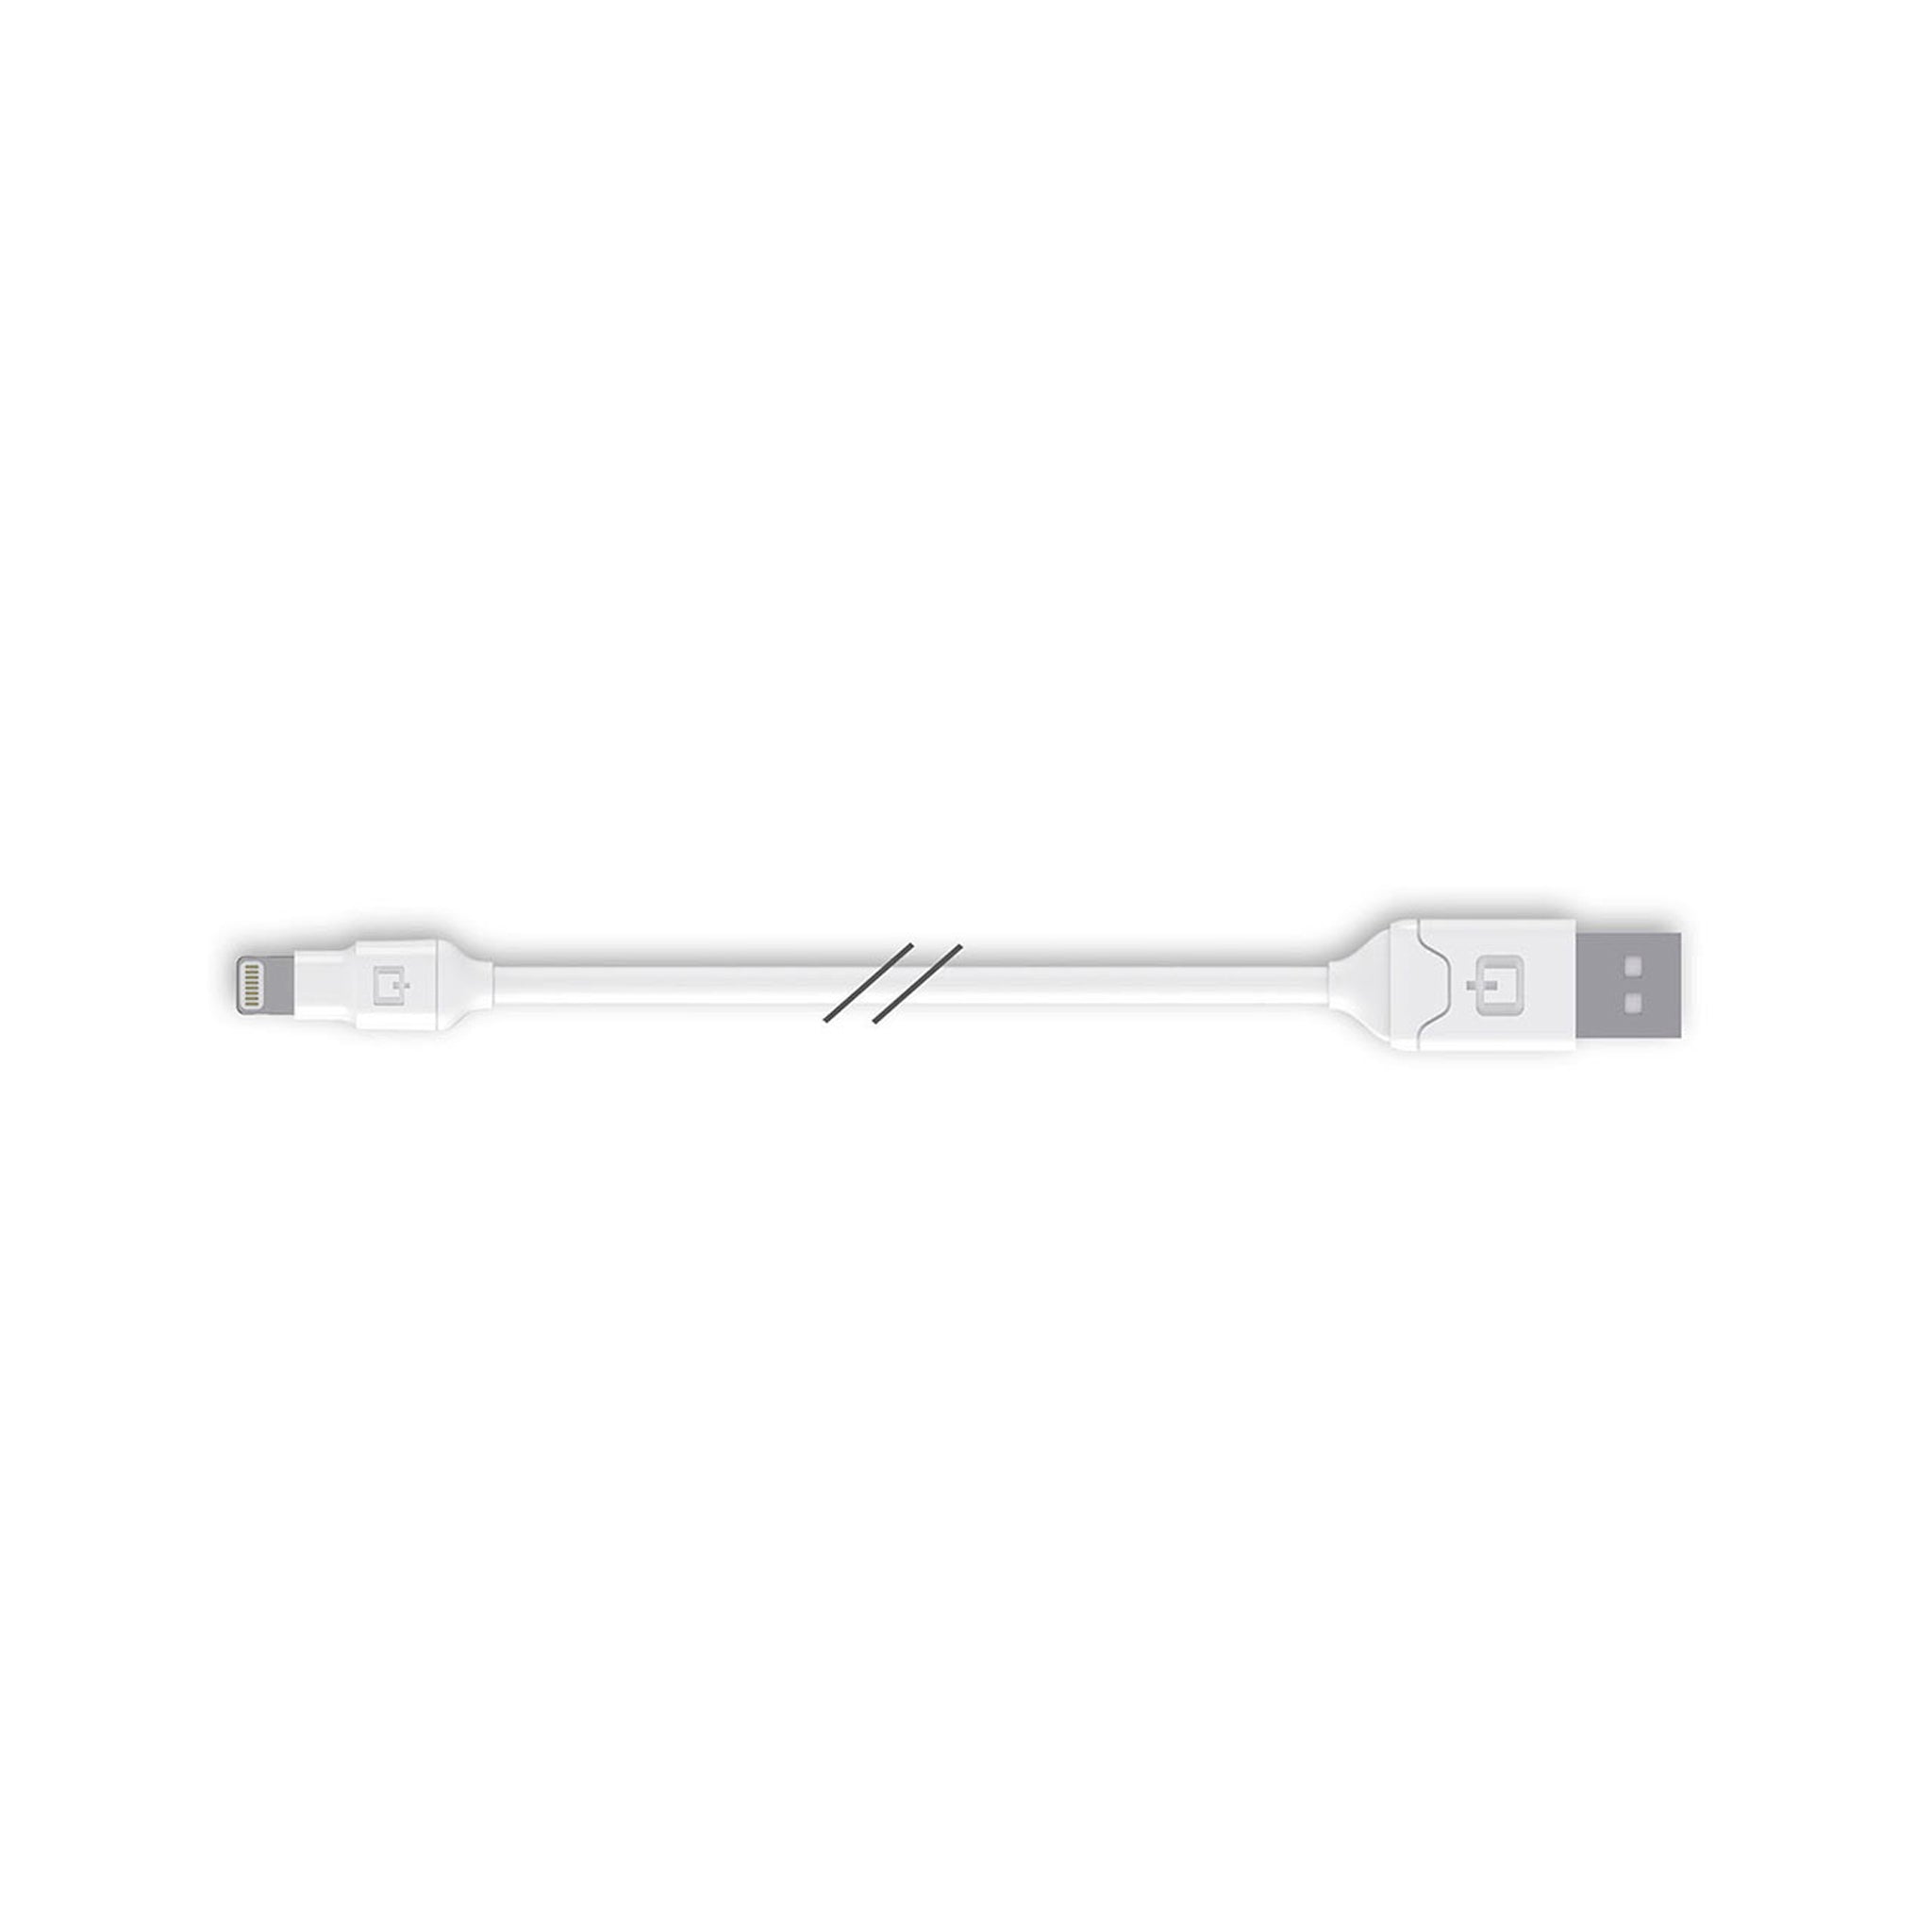 Qmadix - Apple Lightning Cable 10ft - White